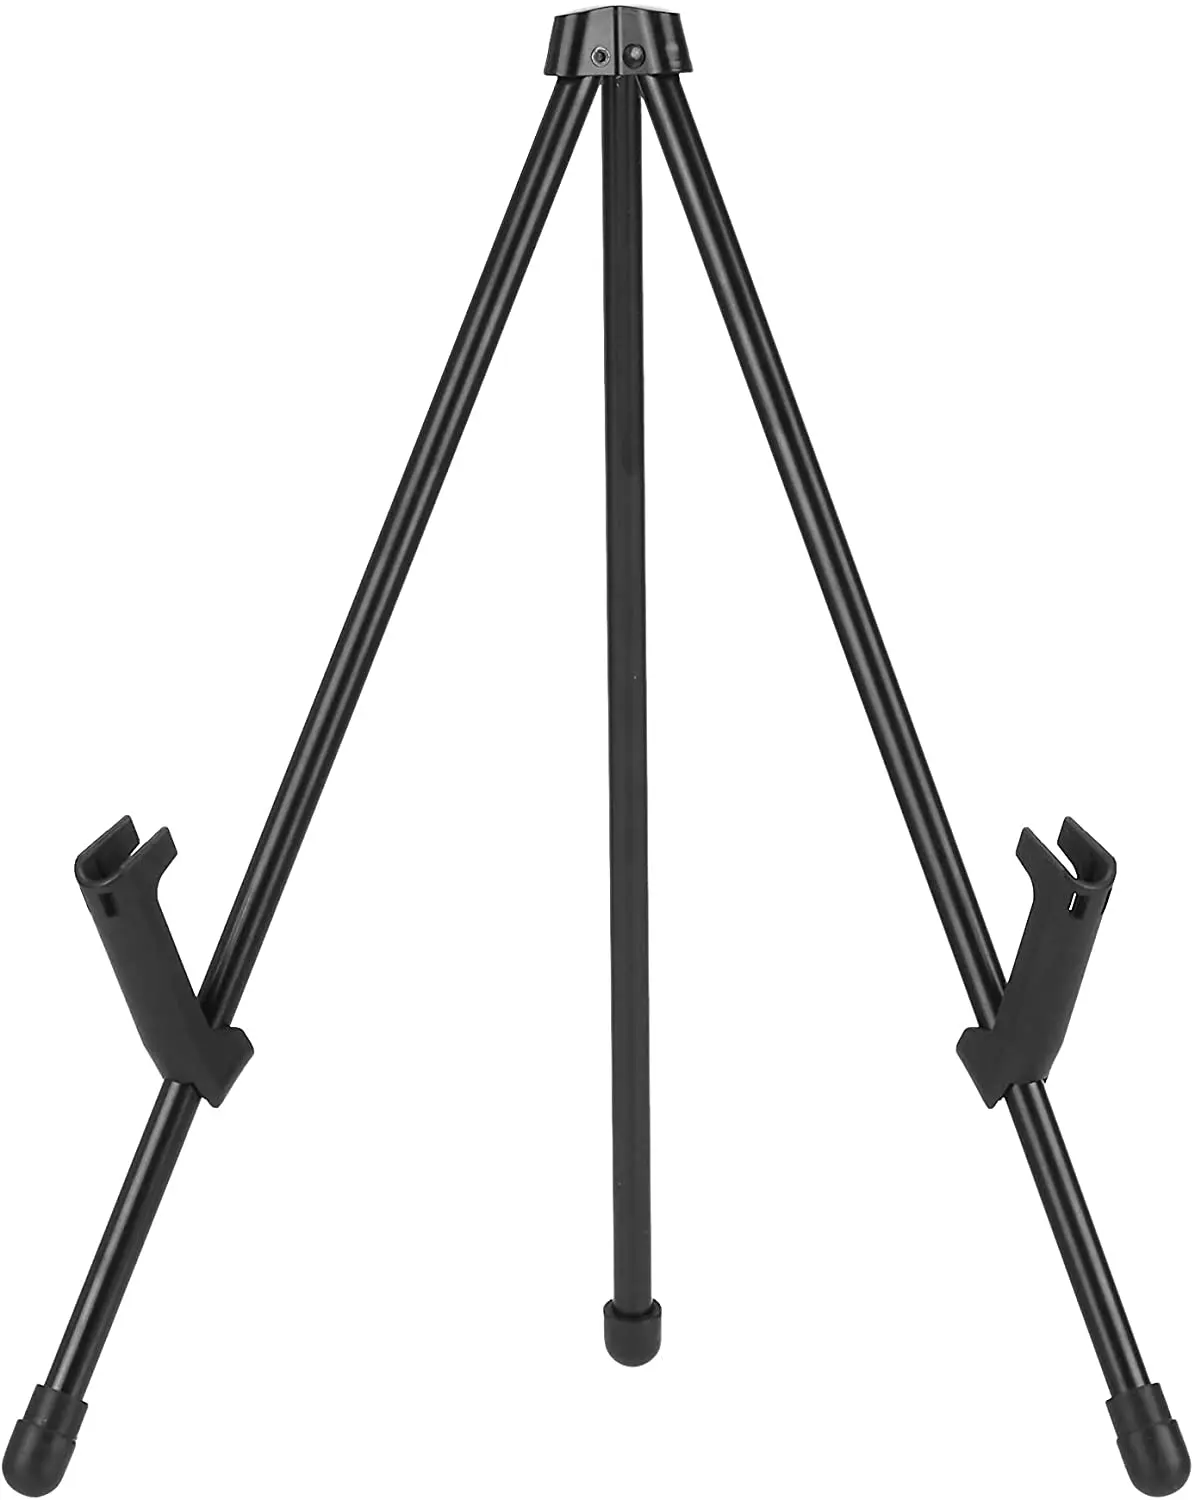 Tabletop Instant Easel - Tripod, Supports 5 lbs